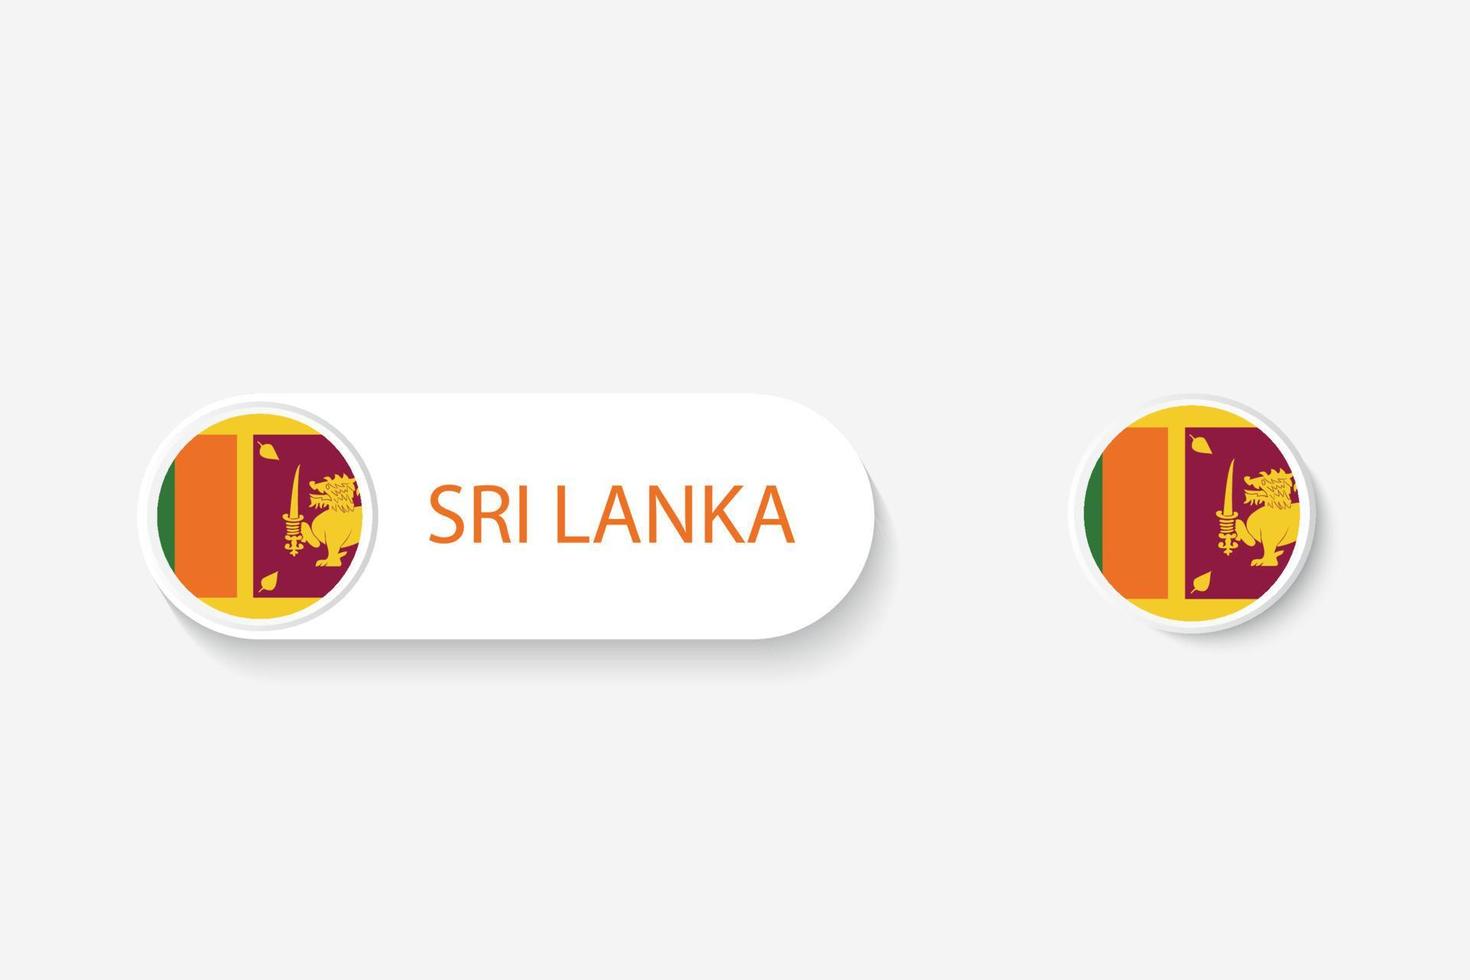 Sri Lanka button flag in illustration of oval shaped with word of Sri Lanka. And button flag Sri Lanka. vector